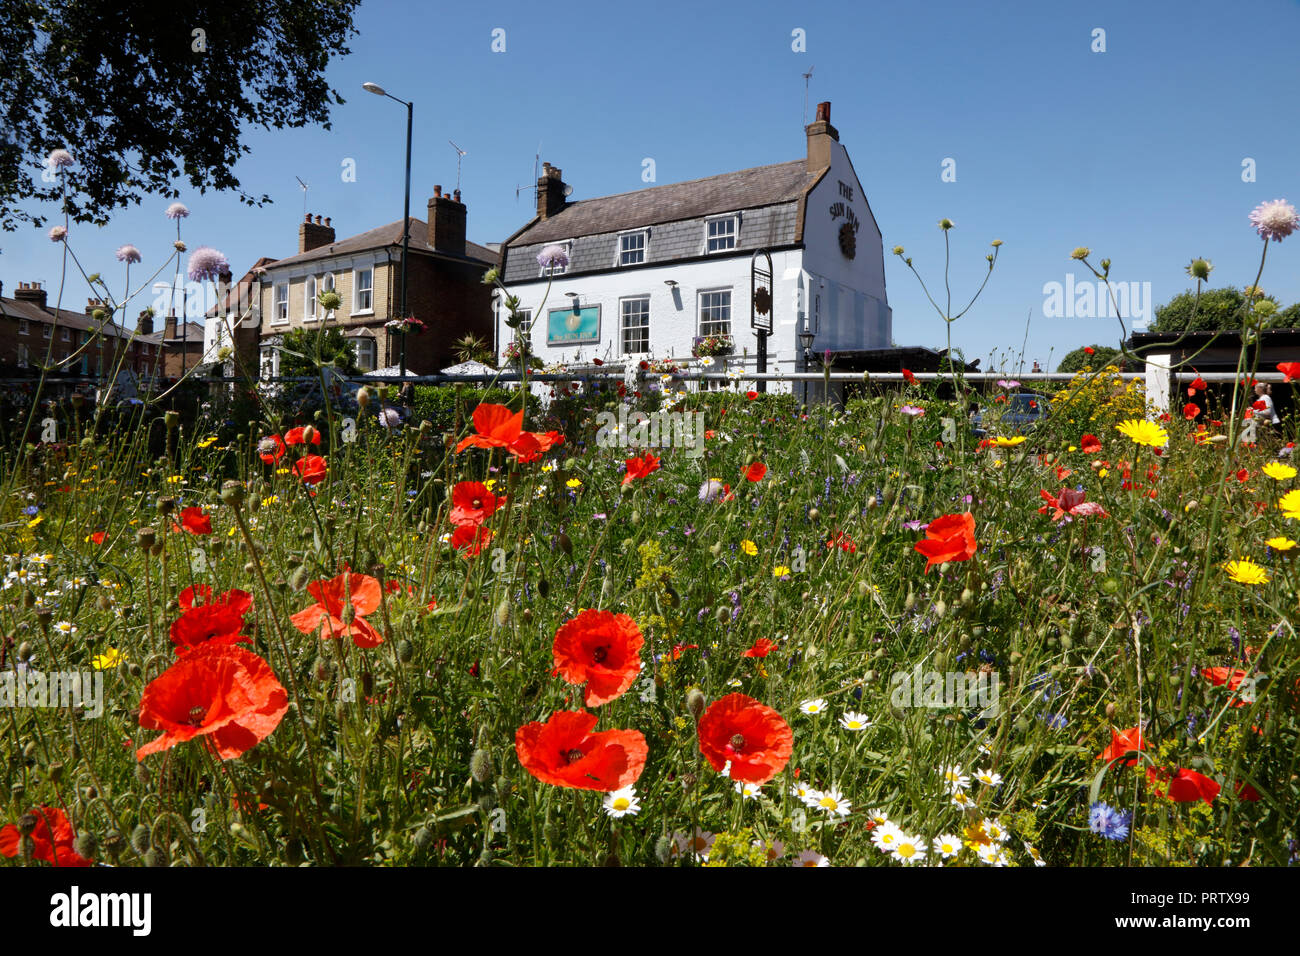 Wildflower meadow in front of the Sun Inn at Barnes, London, UK Stock Photo